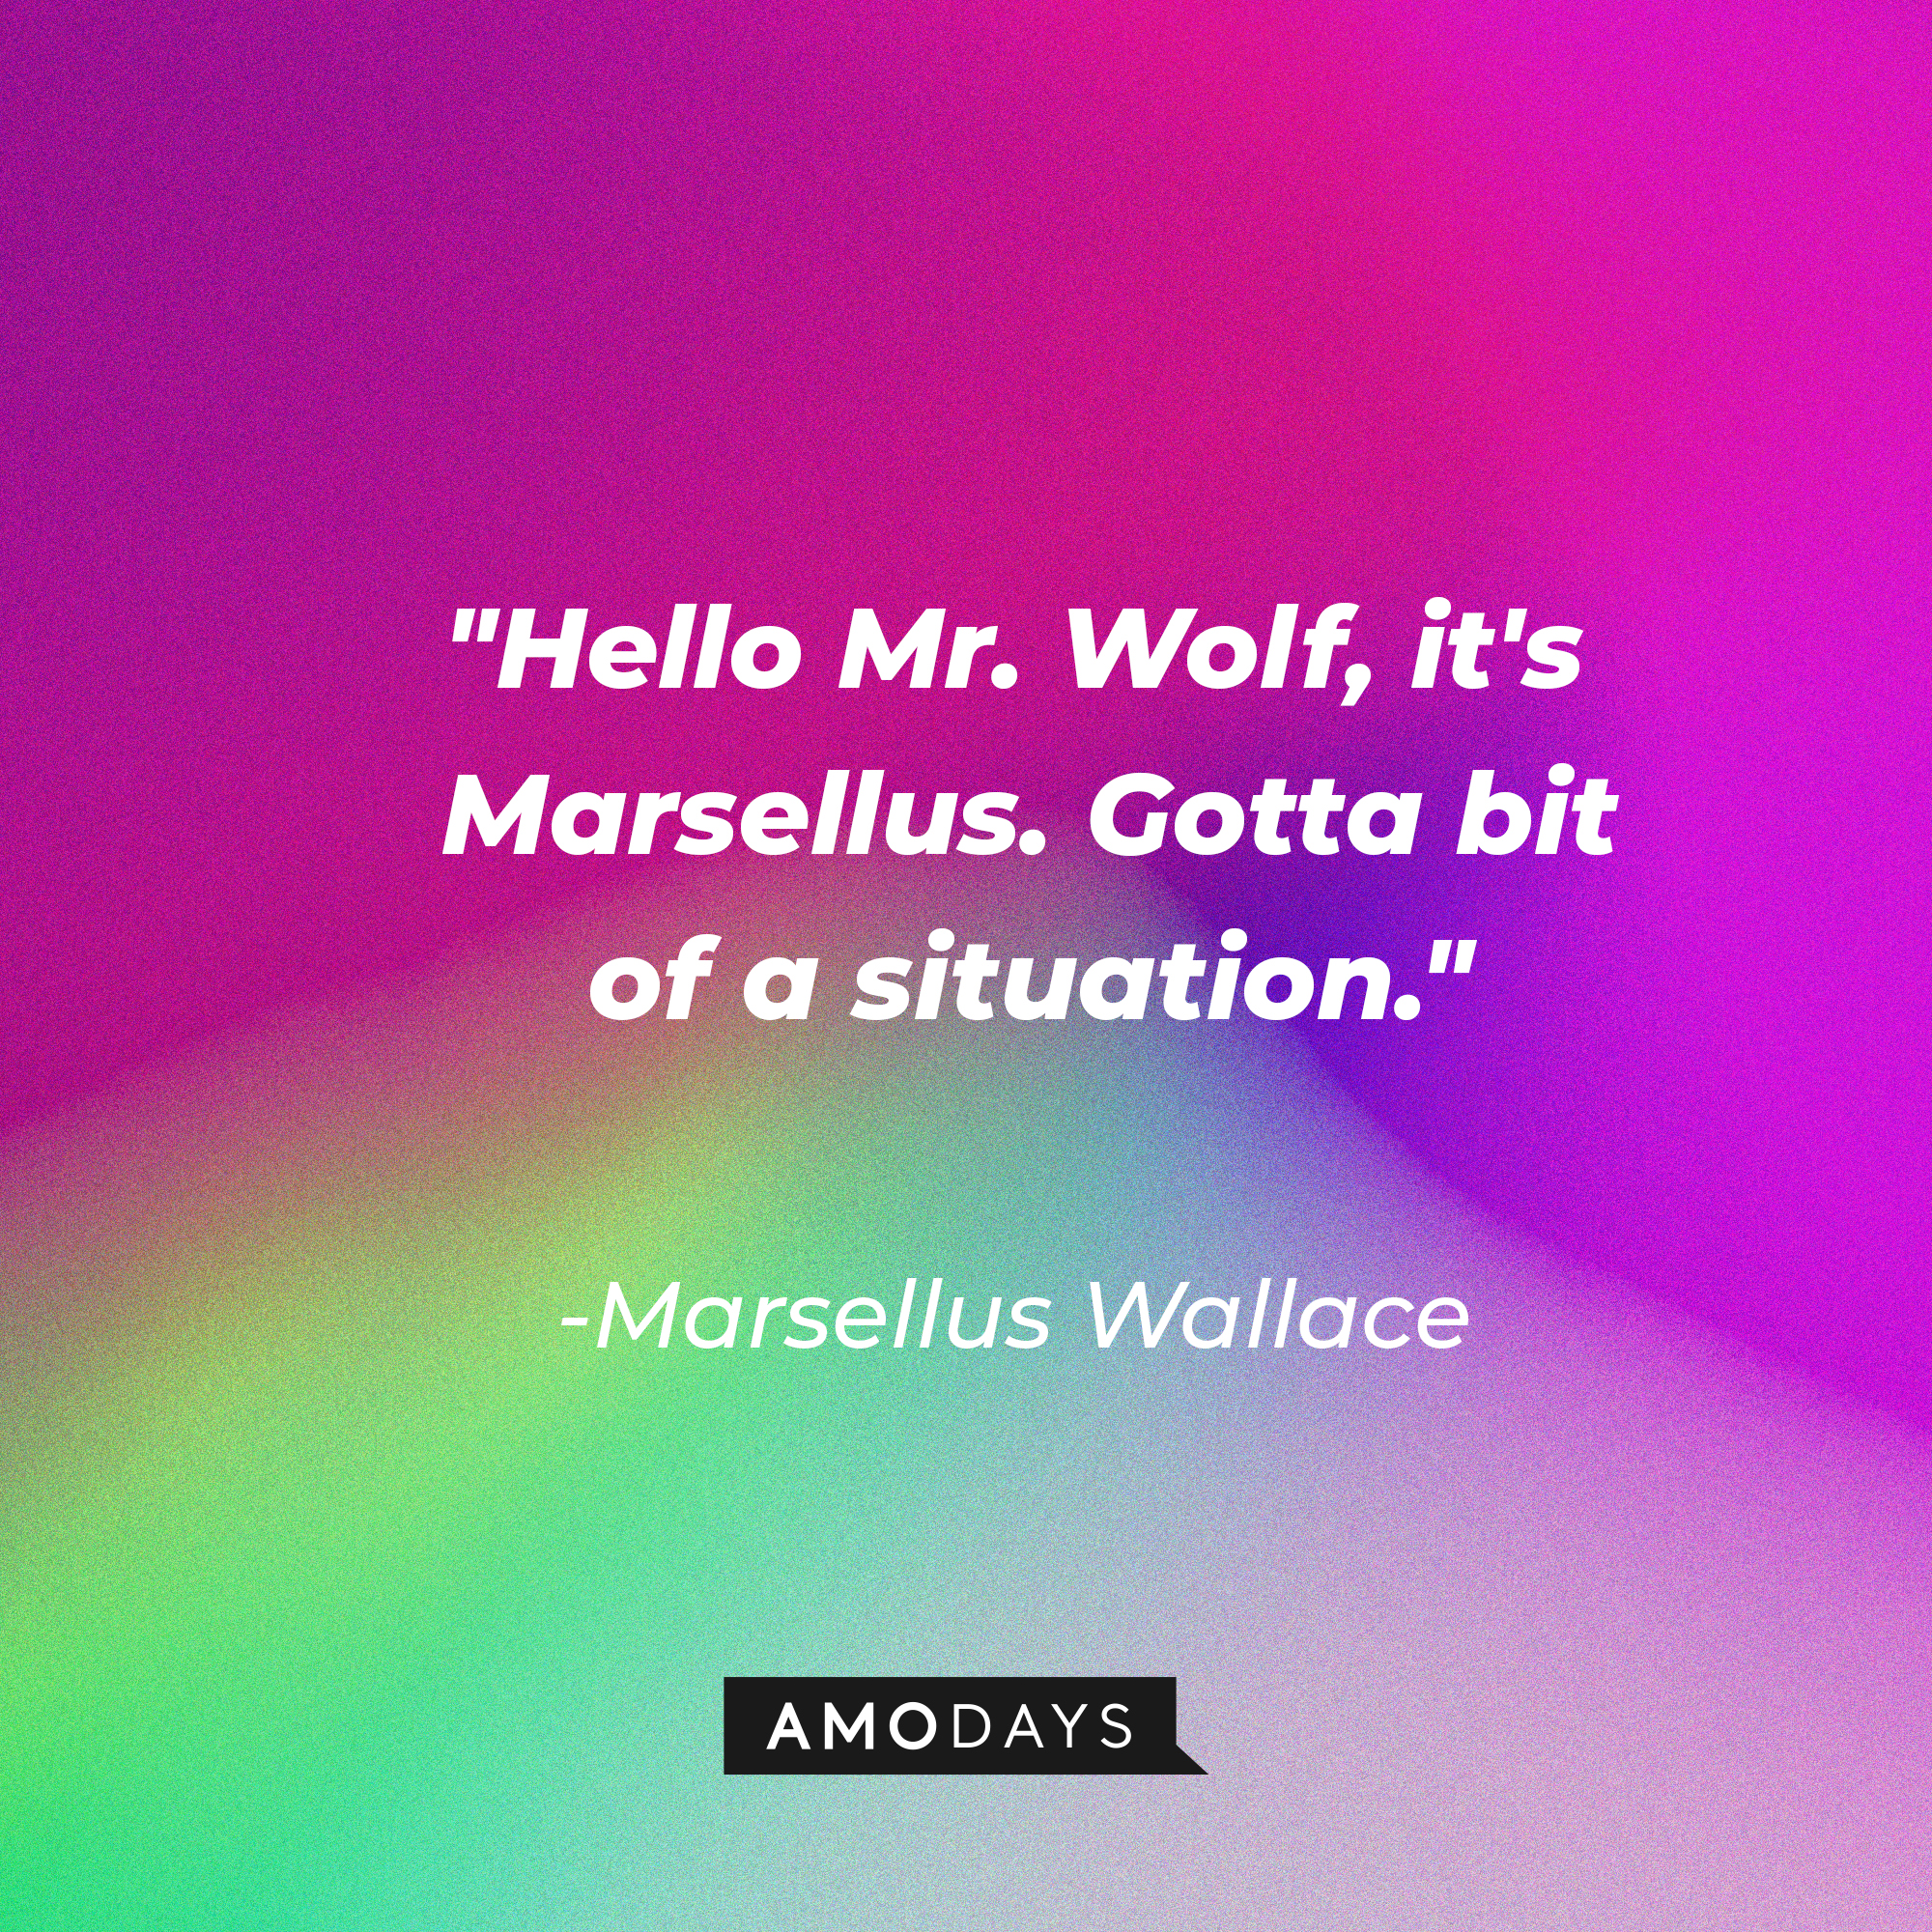 Marsellus Wallace's quote: "Hello Mr. Wolf, it's Marsellus. Gotta bit of a situation." | Source: AmoDays